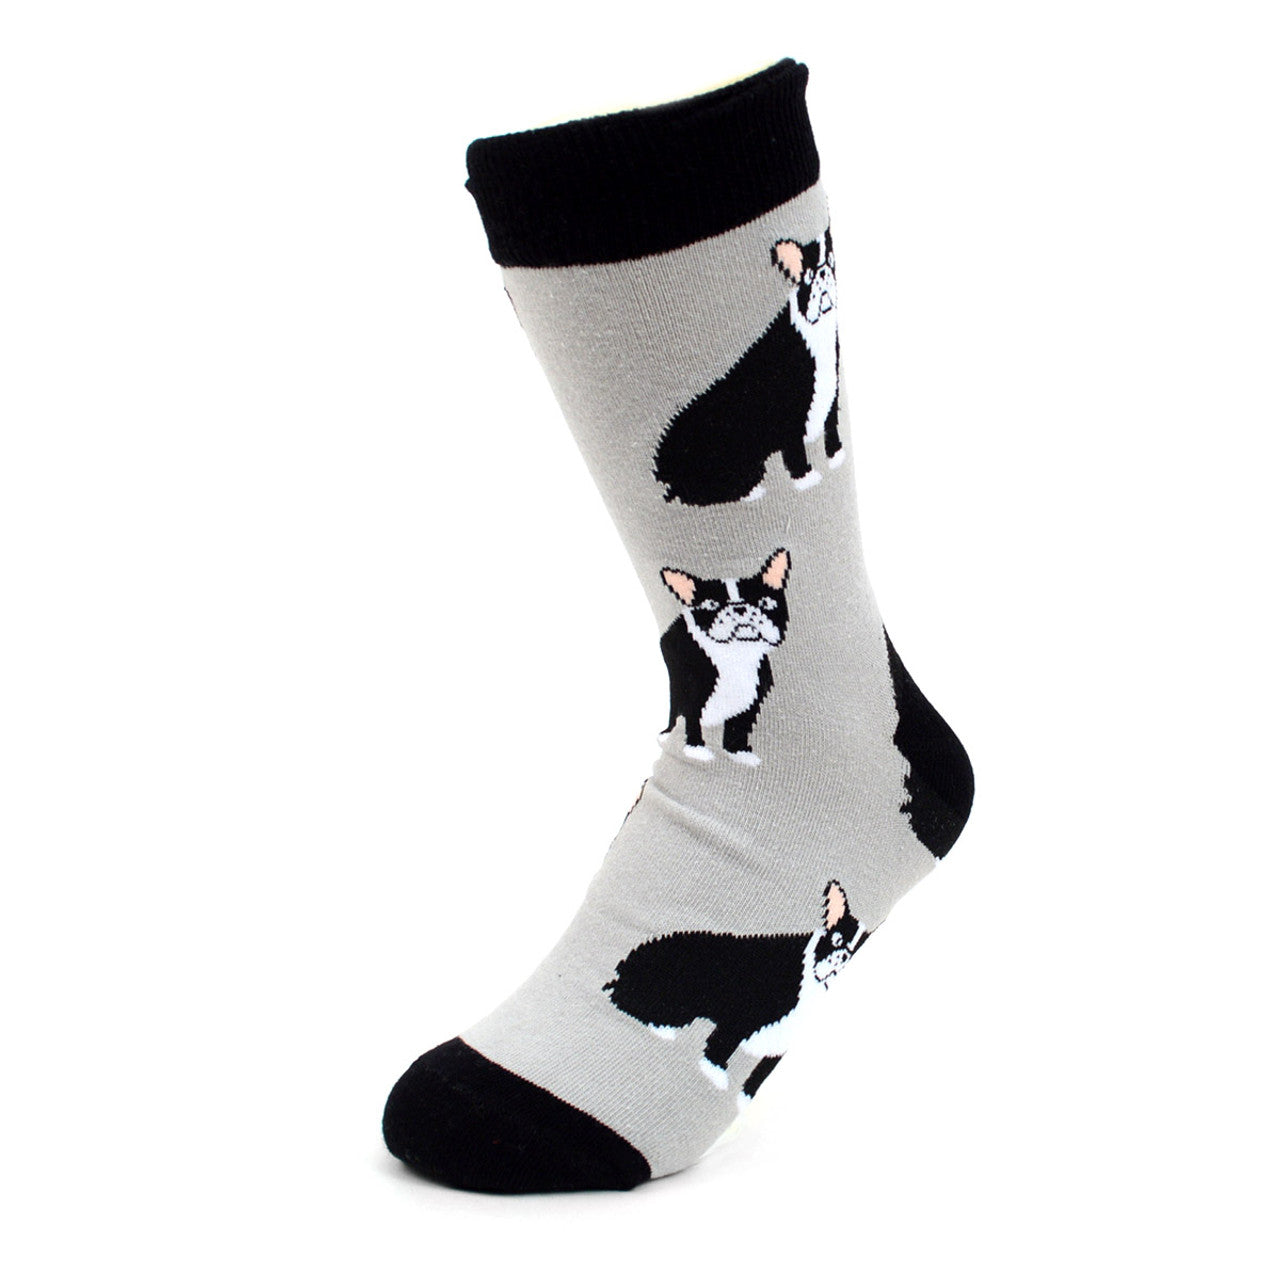 A pair of women's crew socks in a neutral gray shade, featuring multiple French Bulldog faces and silhouettes. The toes and heels are solid black, complementing the playful dog pattern.